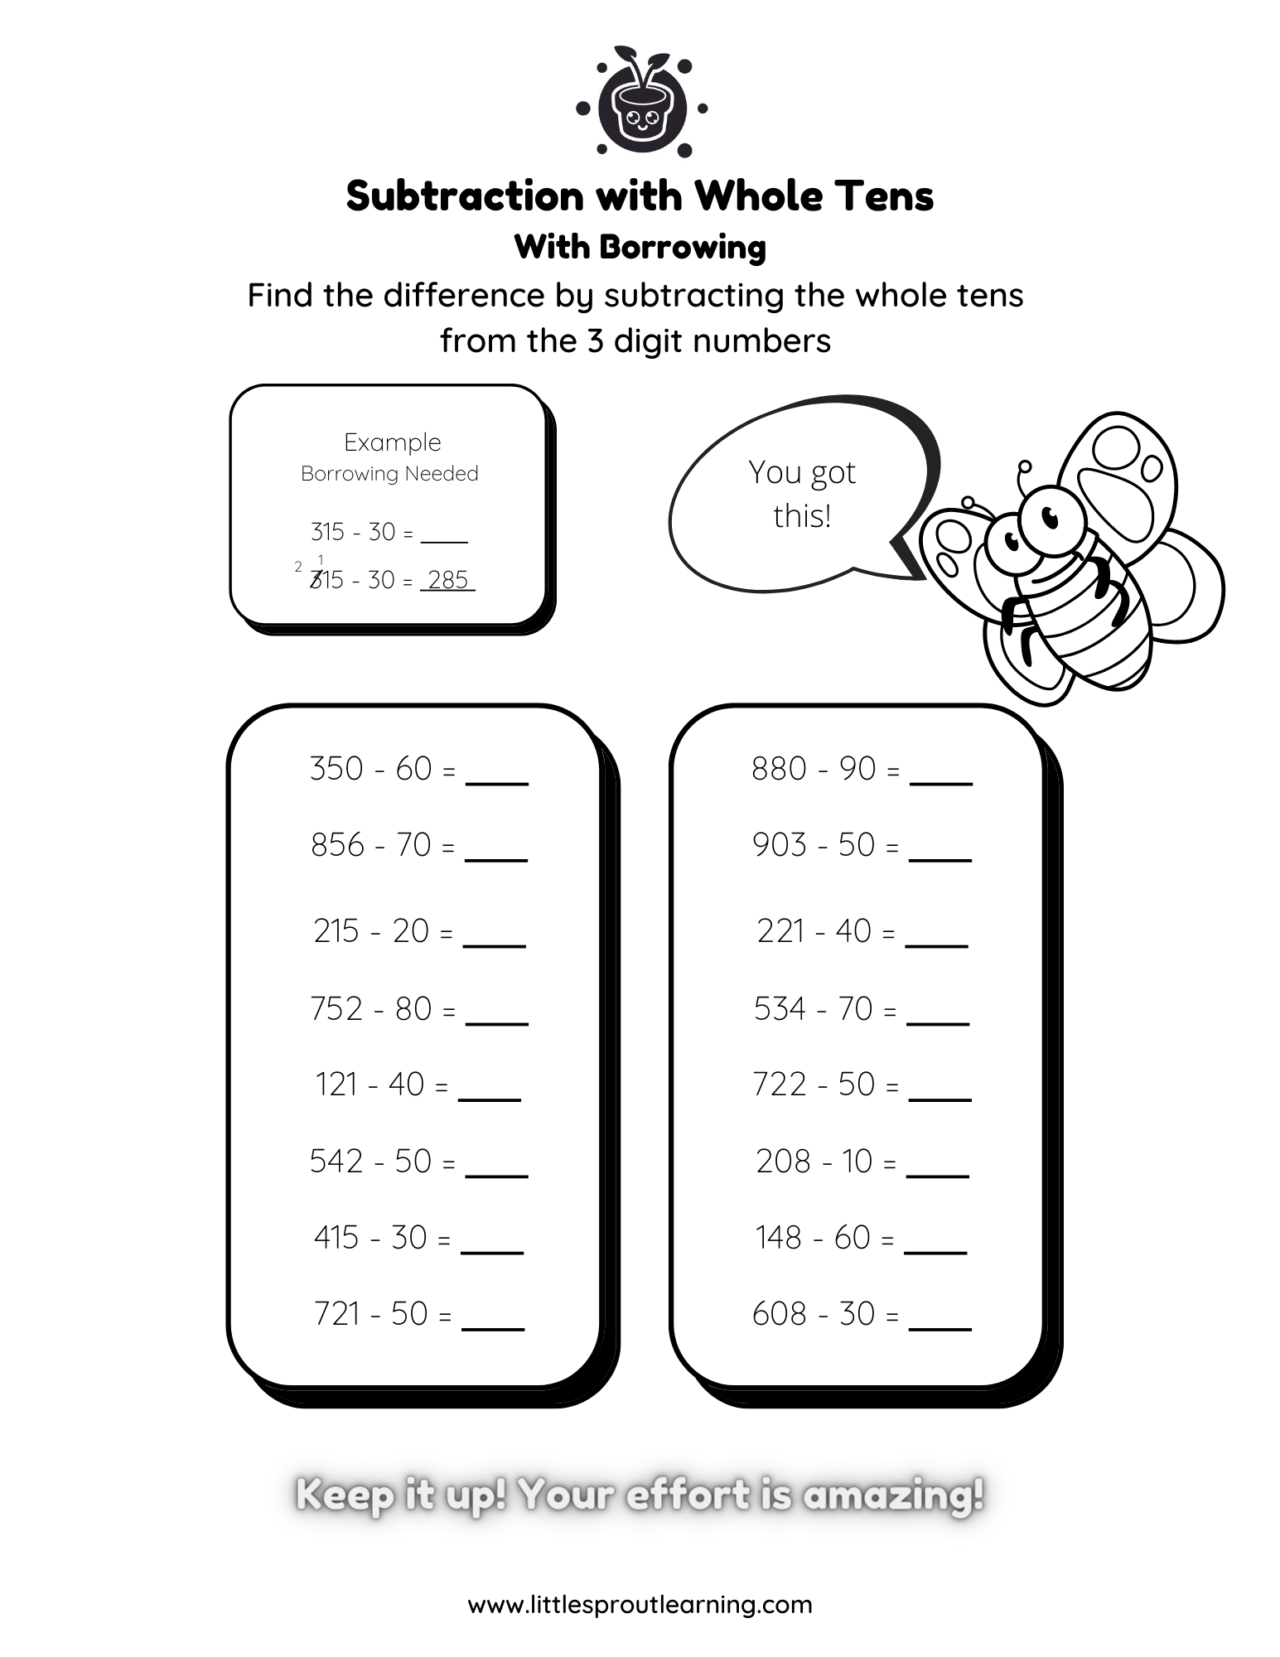 subtraction-worksheet-subtracting-with-whole-tens-with-borrowing-little-sprout-art